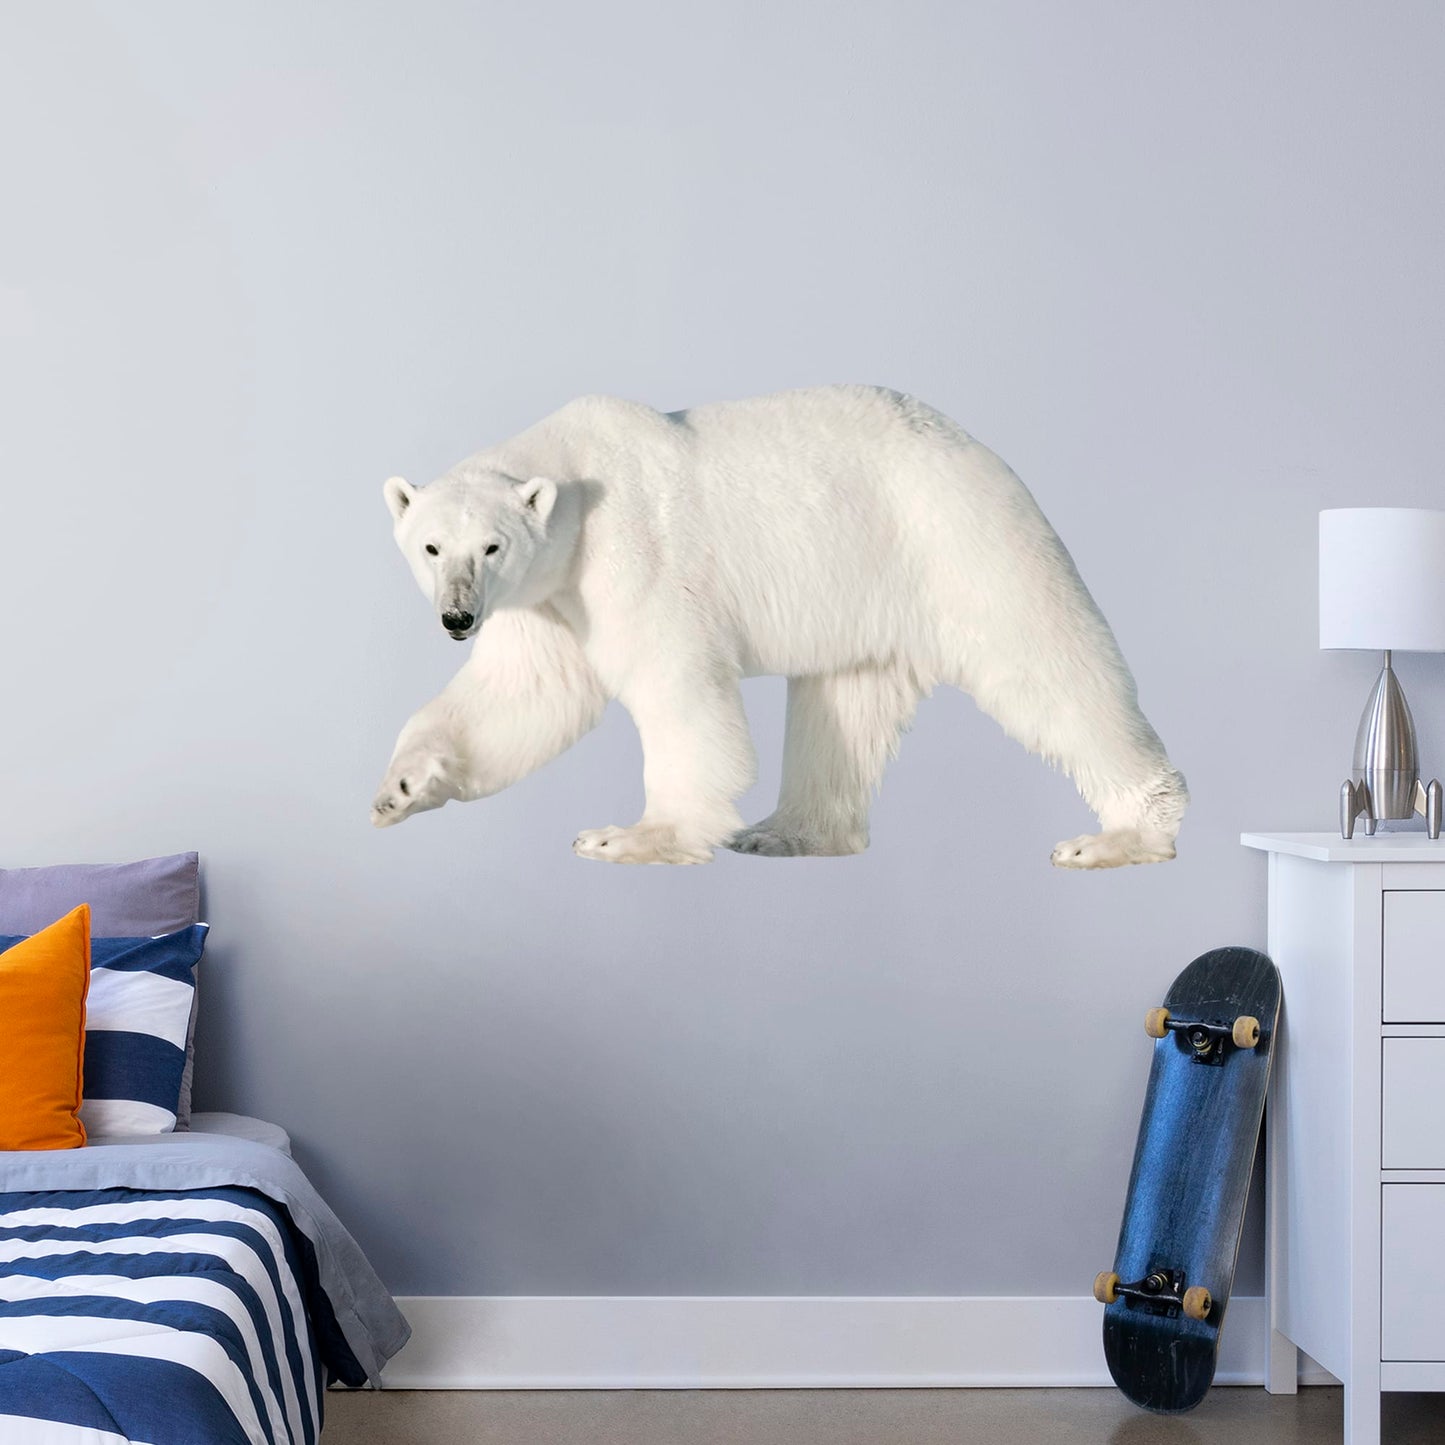 Life-Size Animal + 5 Decals (78"W x 47"H)